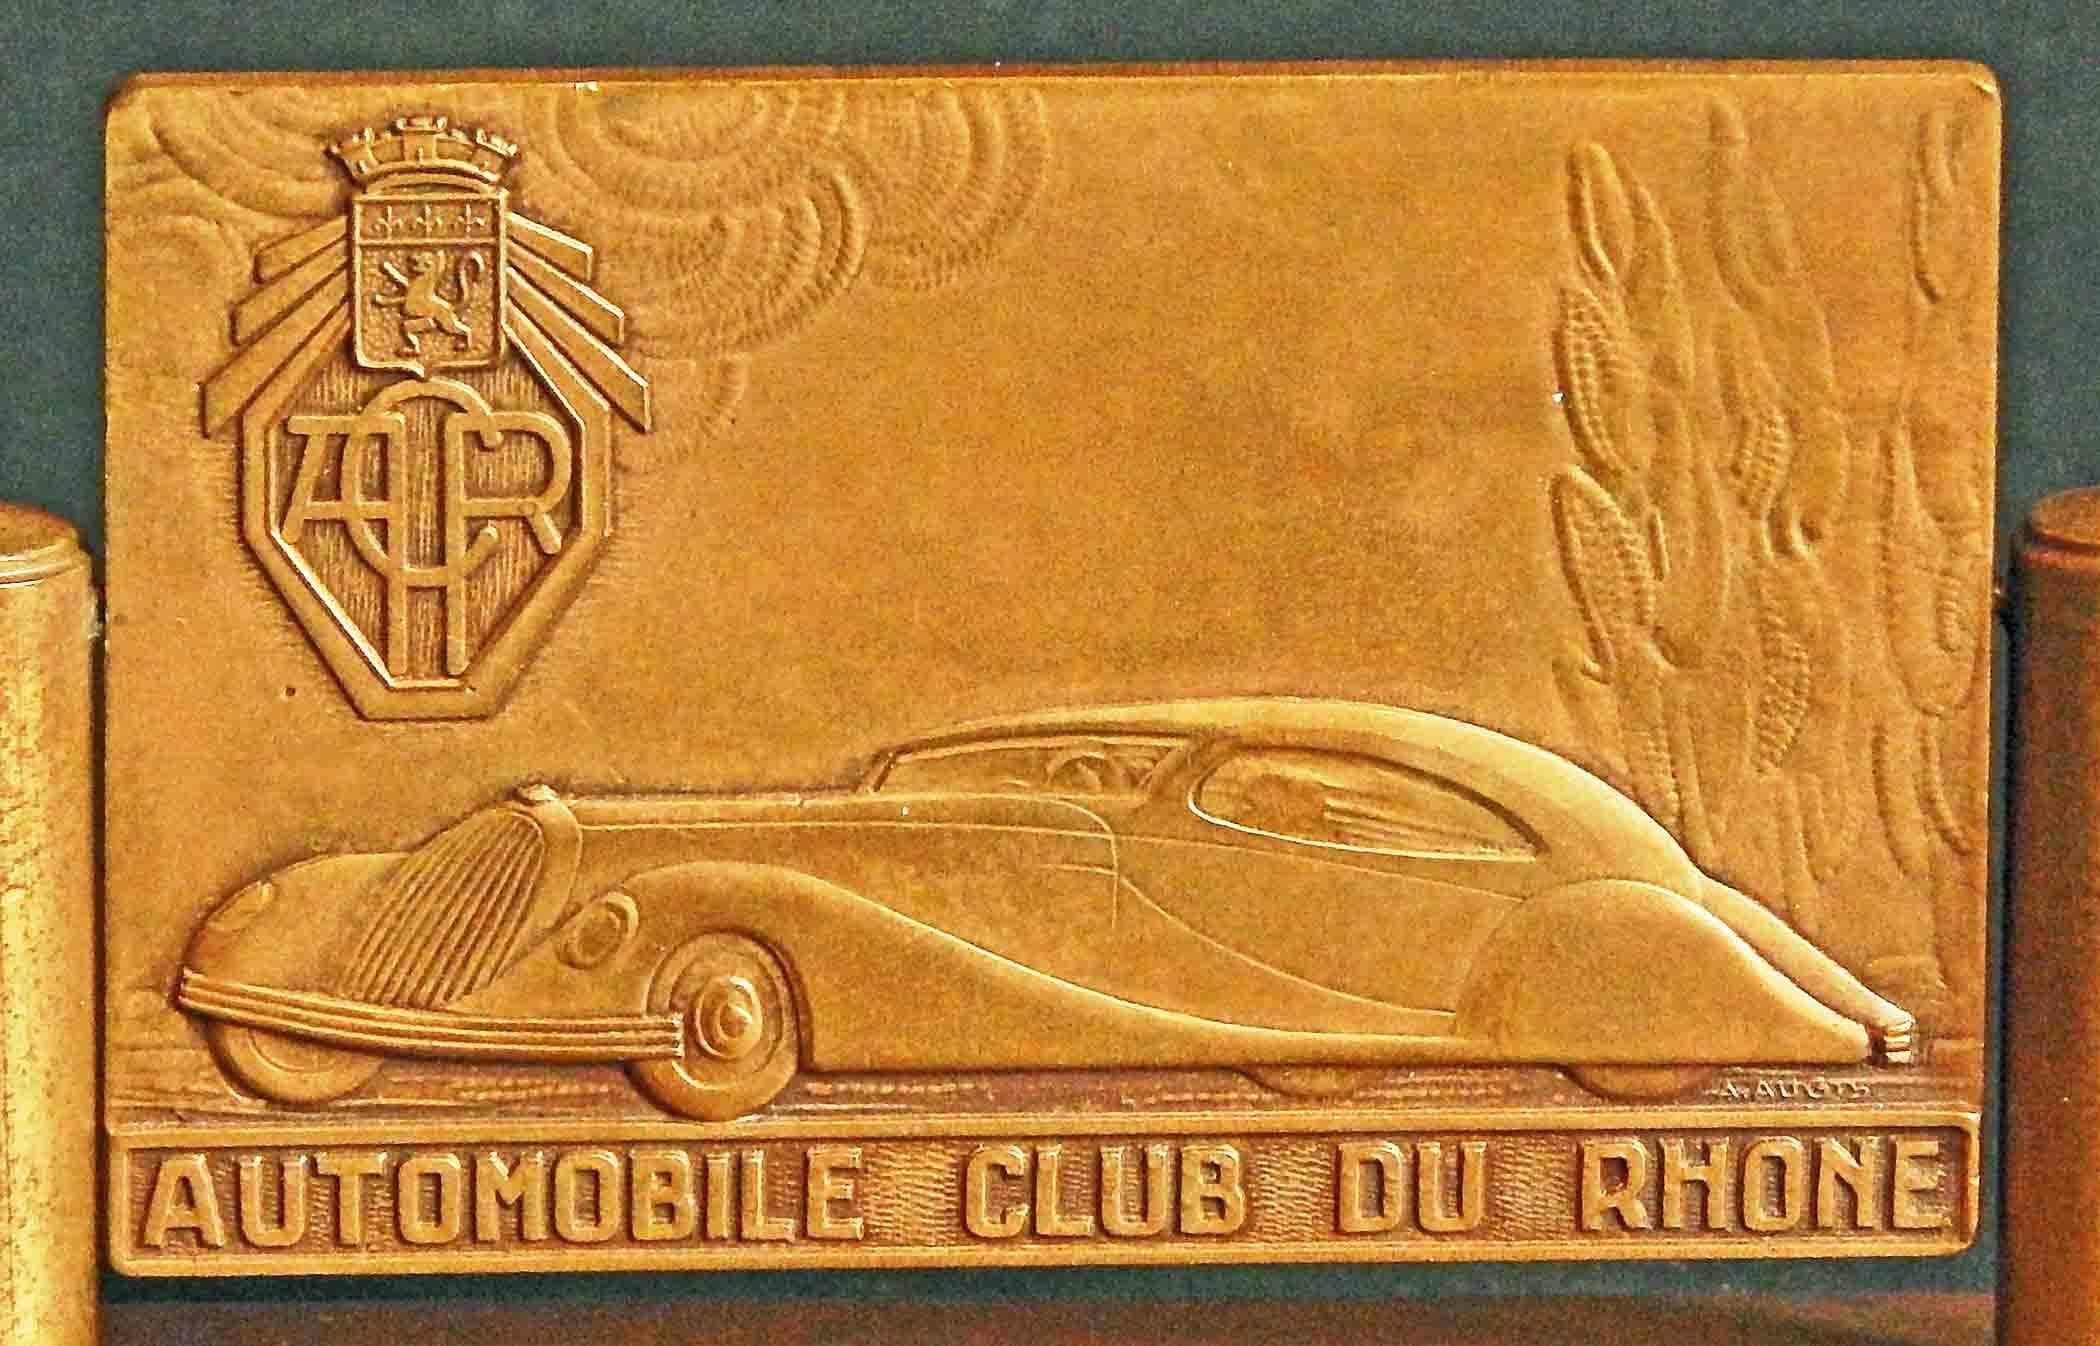 This rare and striking desk accessory, consisting of a bas relief sculptural bronze plaque suspended above a bronze base, was sculpted by A. Augis for the Automobile Club of Rhone, and depicts a streamlined luxury car -- probably a Talbot-Lago coupe